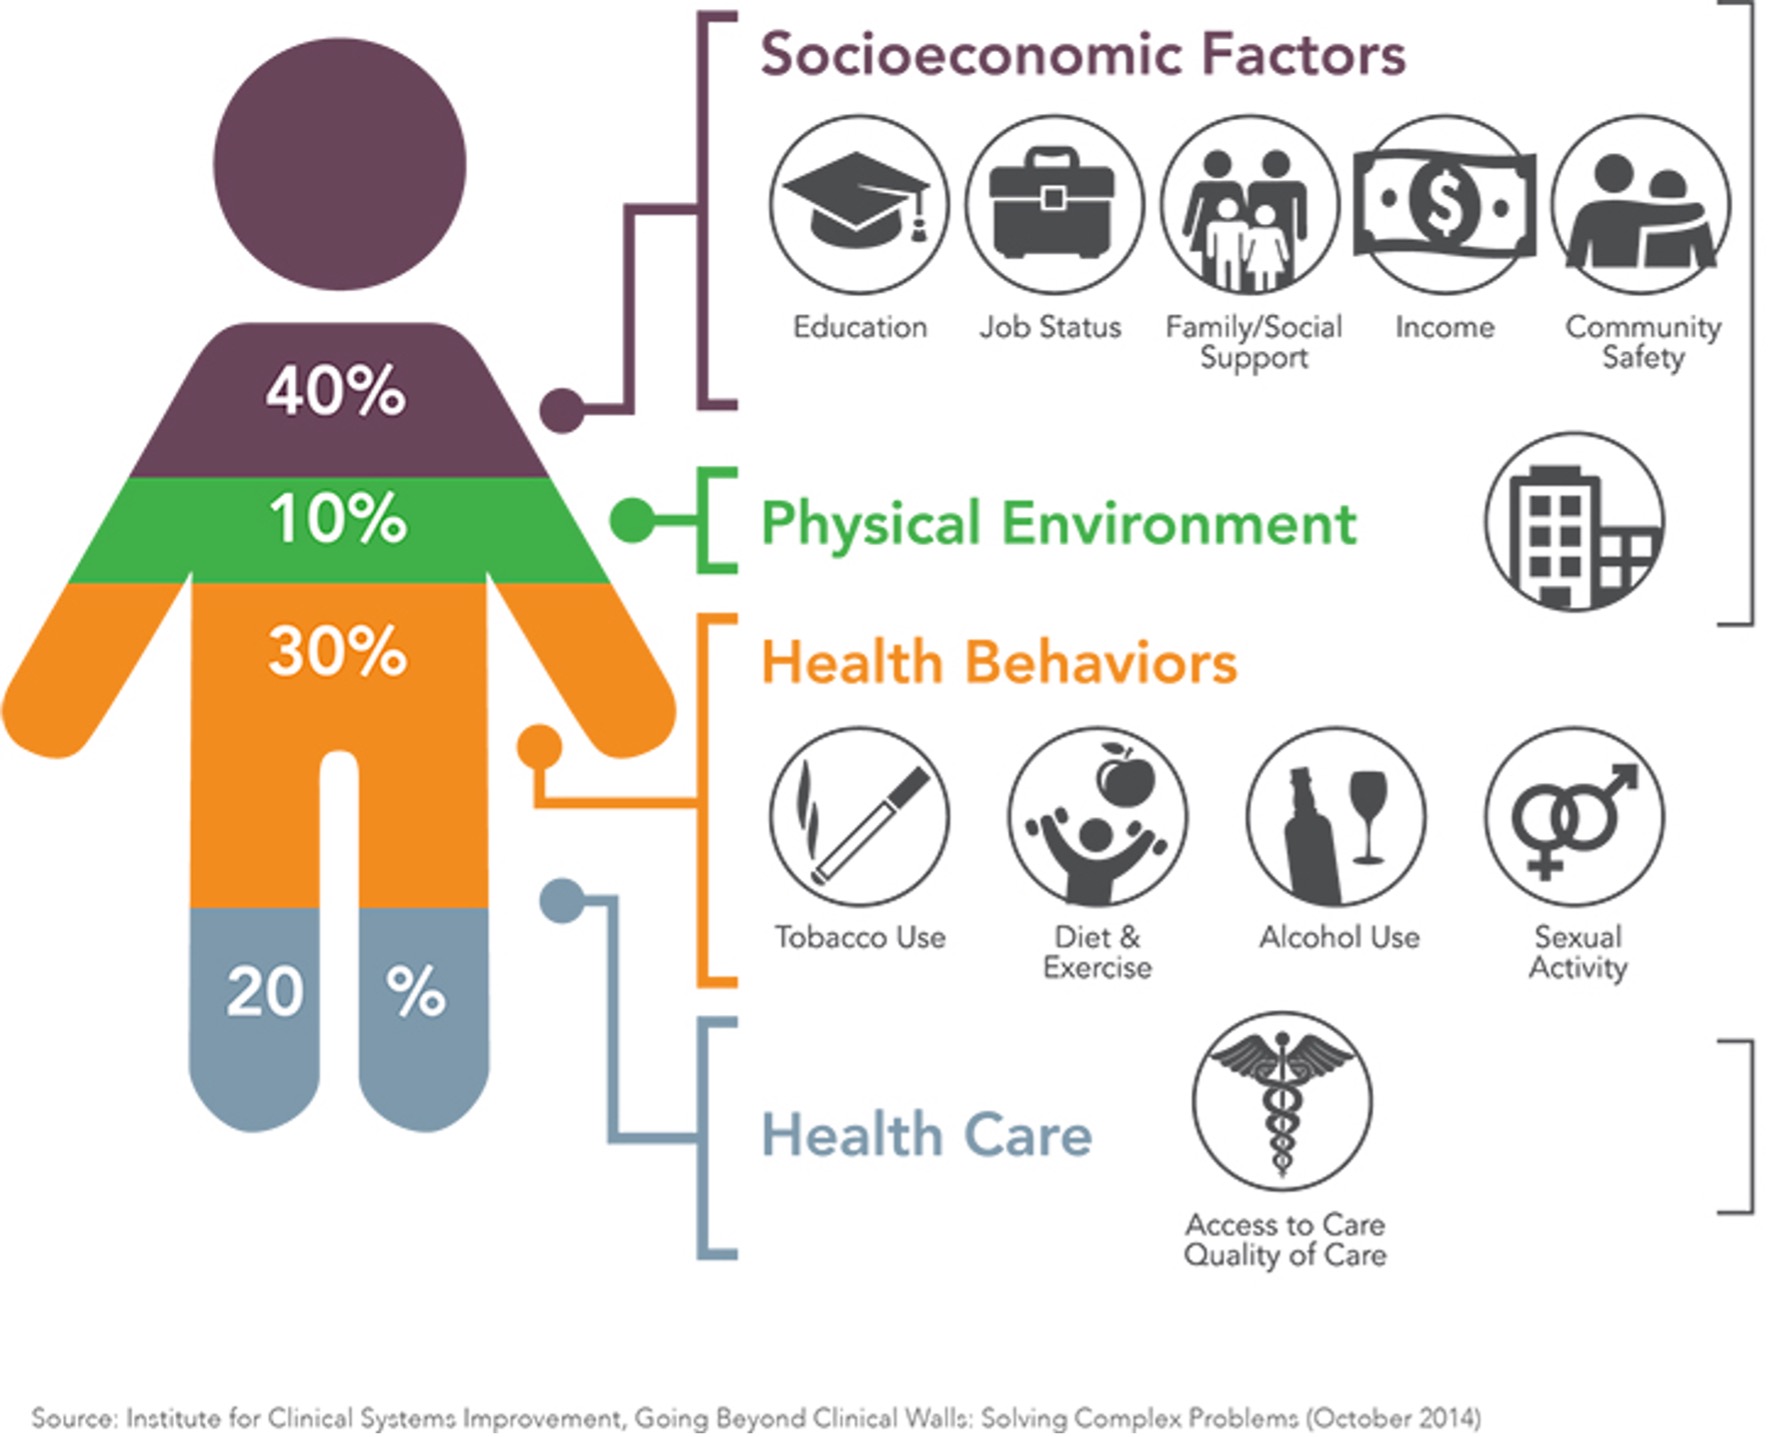 What determines our health and well-being?